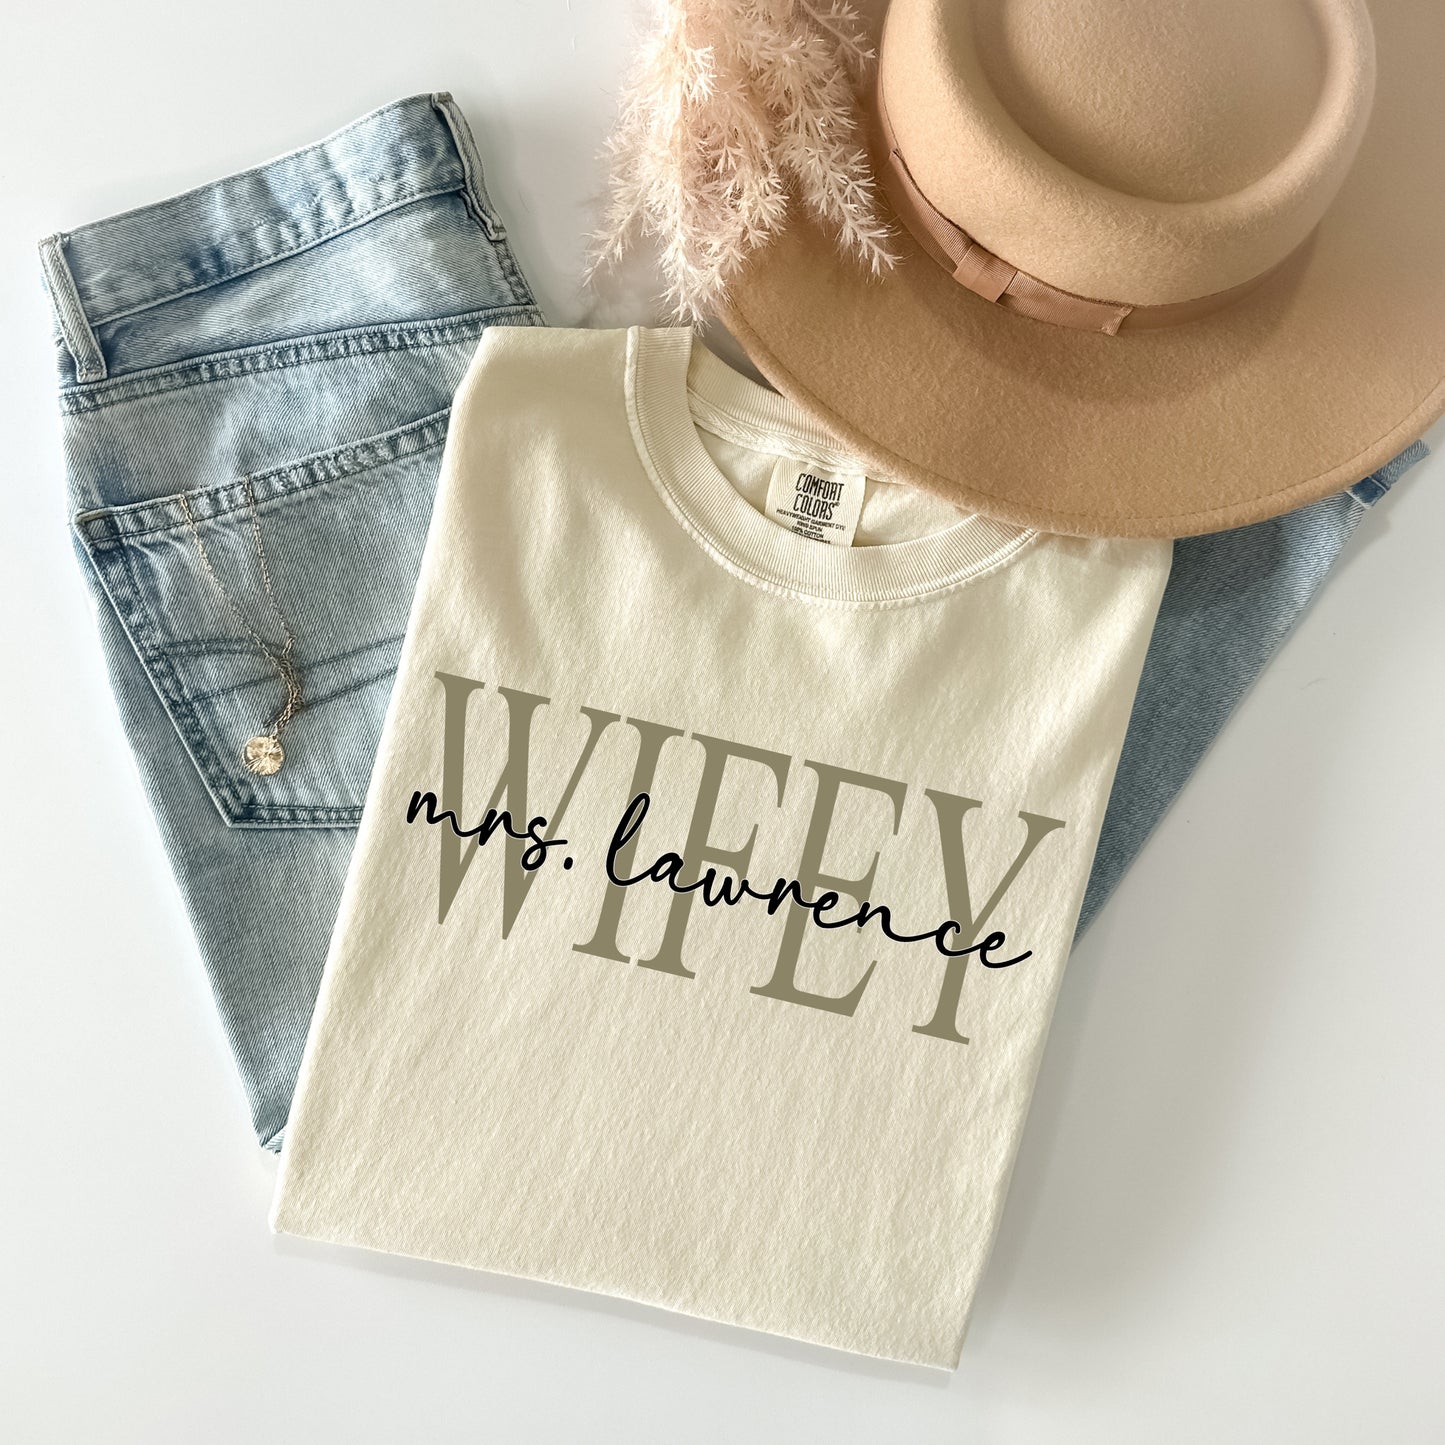 Wifey with Name (Customizable) Graphic Tee